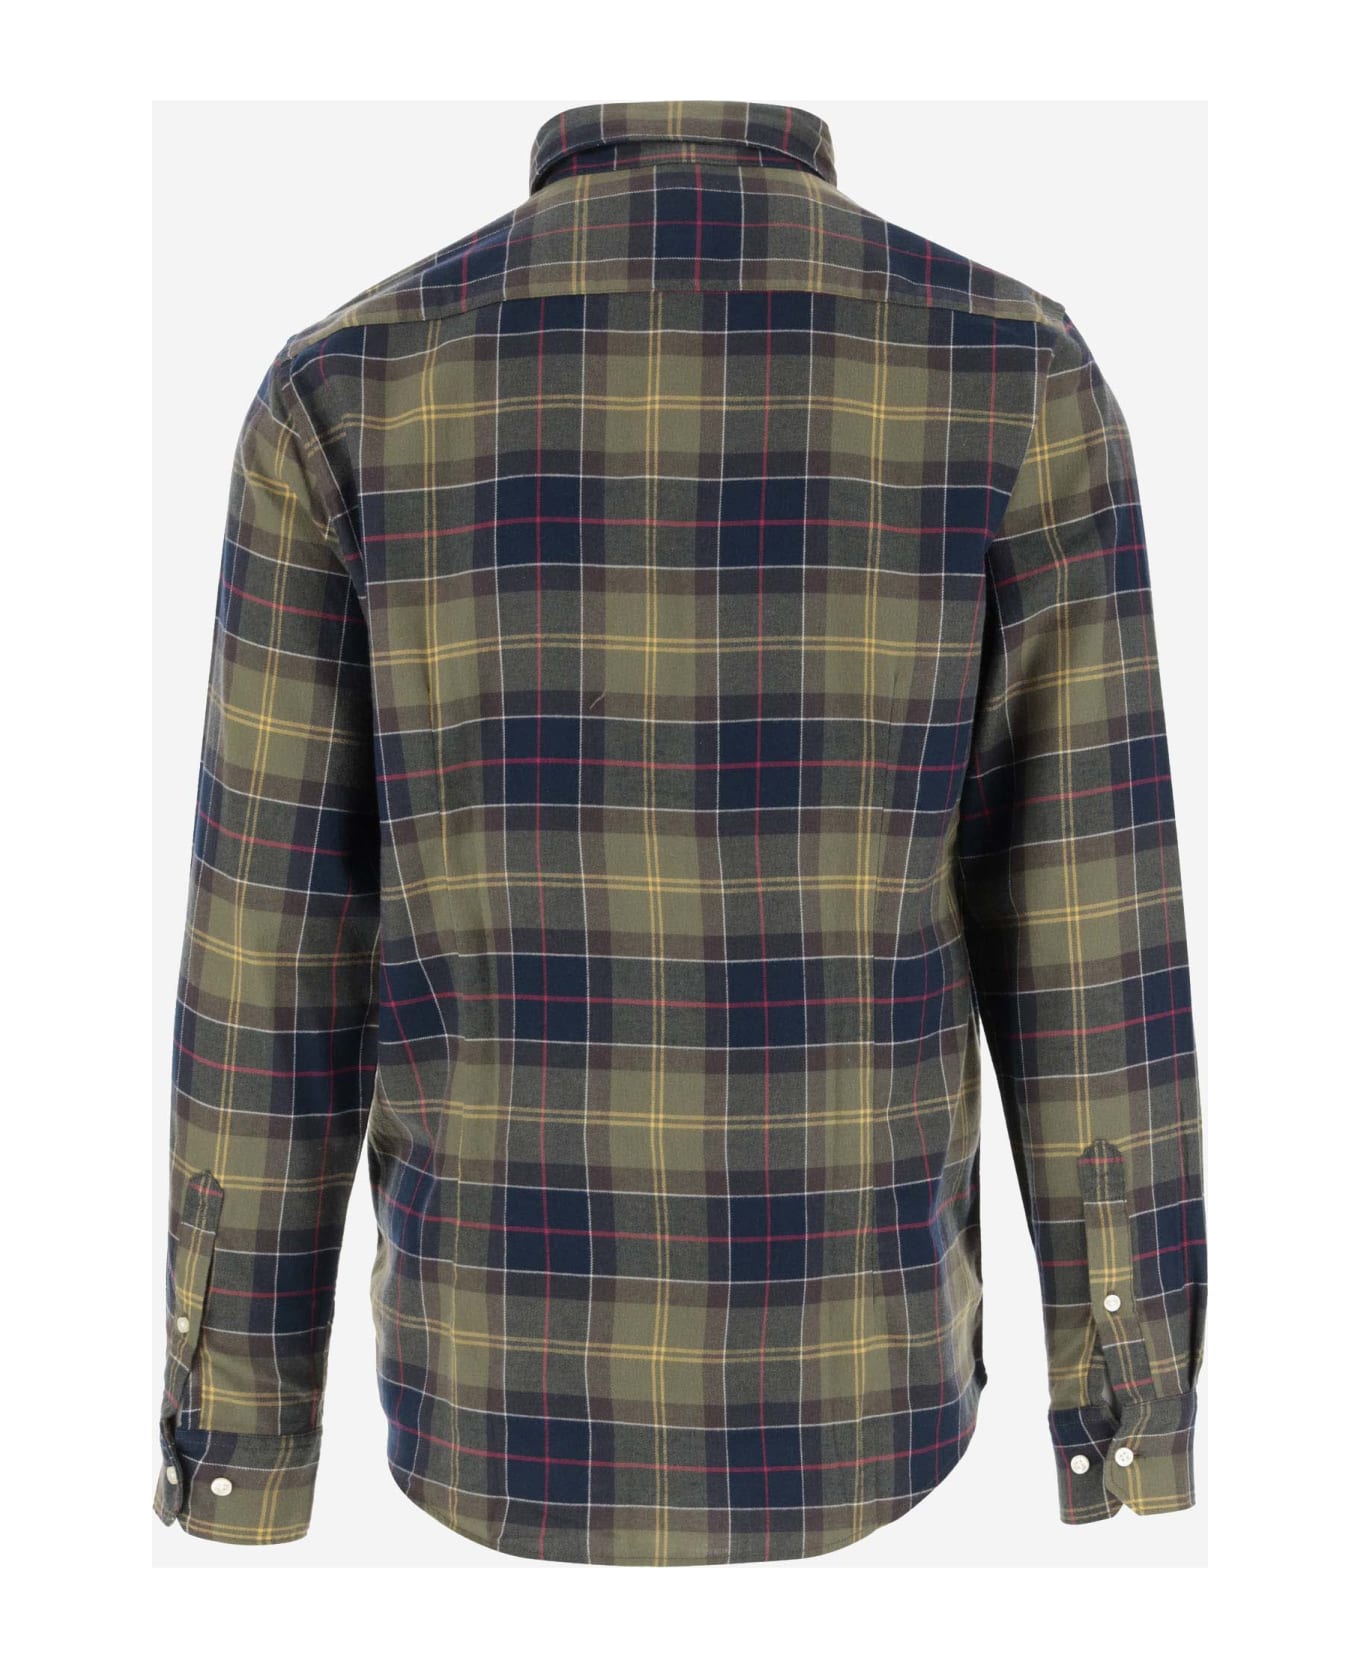 Barbour Cotton Shirt With Check Pattern - Classic Tartan シャツ